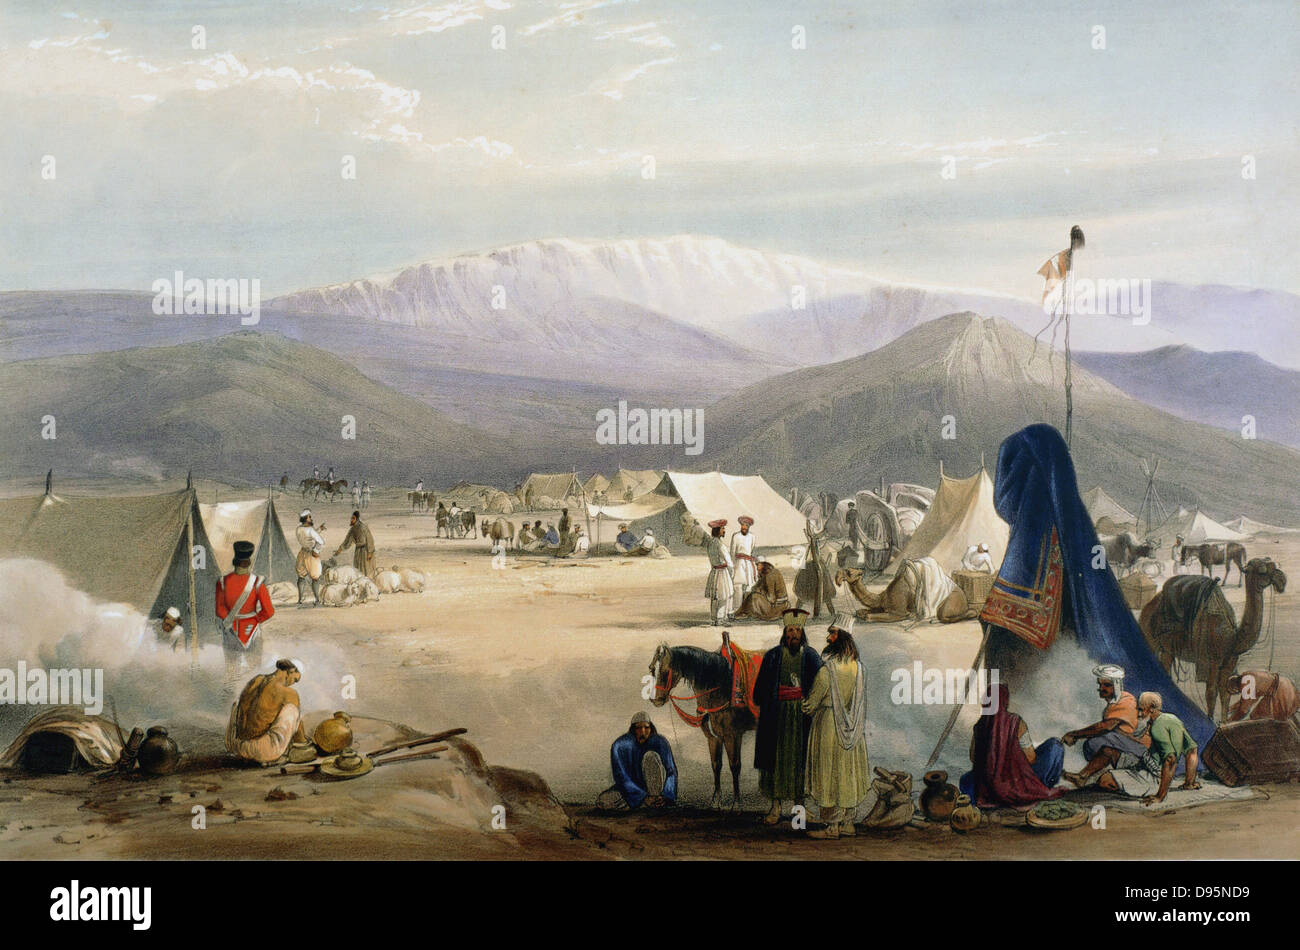 First Anglo-Afghan War 1838-1842: British army under canvas at Dadur at entrance to the Bolan Pass. Sioriab mountains in background. From J Atkinson 'Sketches in Afghanistan' London 1842. Hand-coloured lithograph. Stock Photo